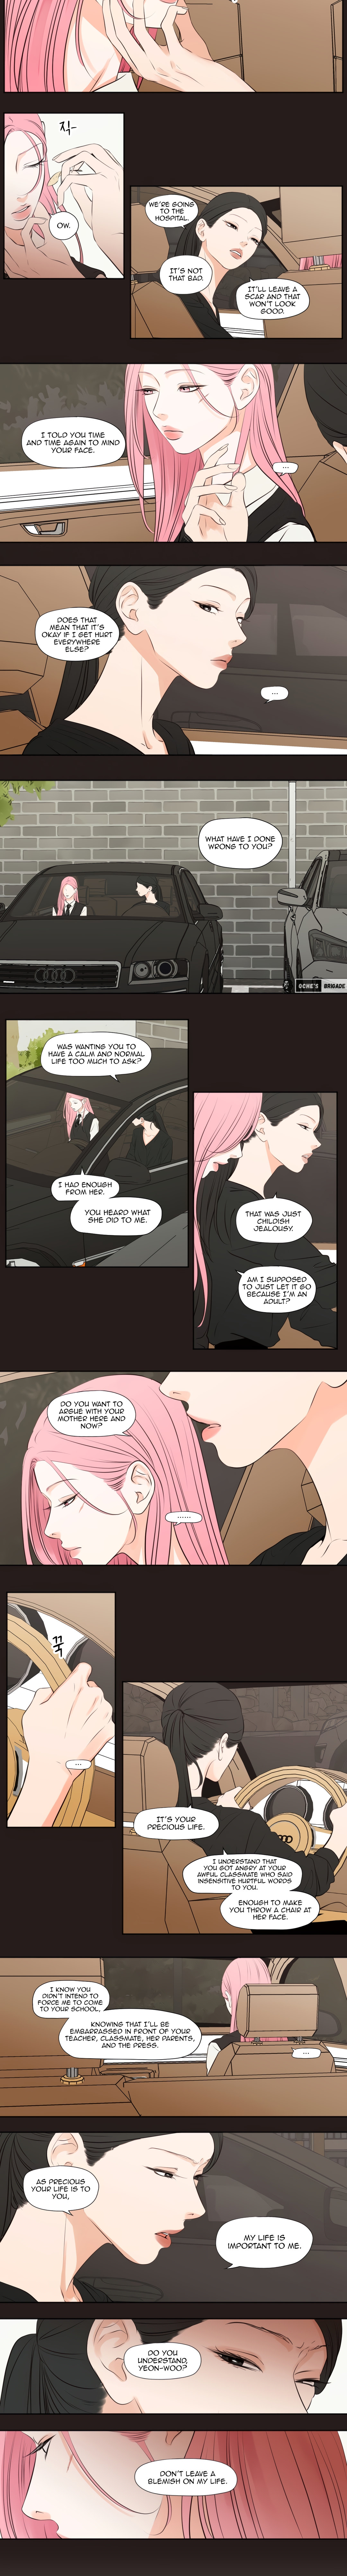 Show Me Your Bust - Chapter 31 Page 3